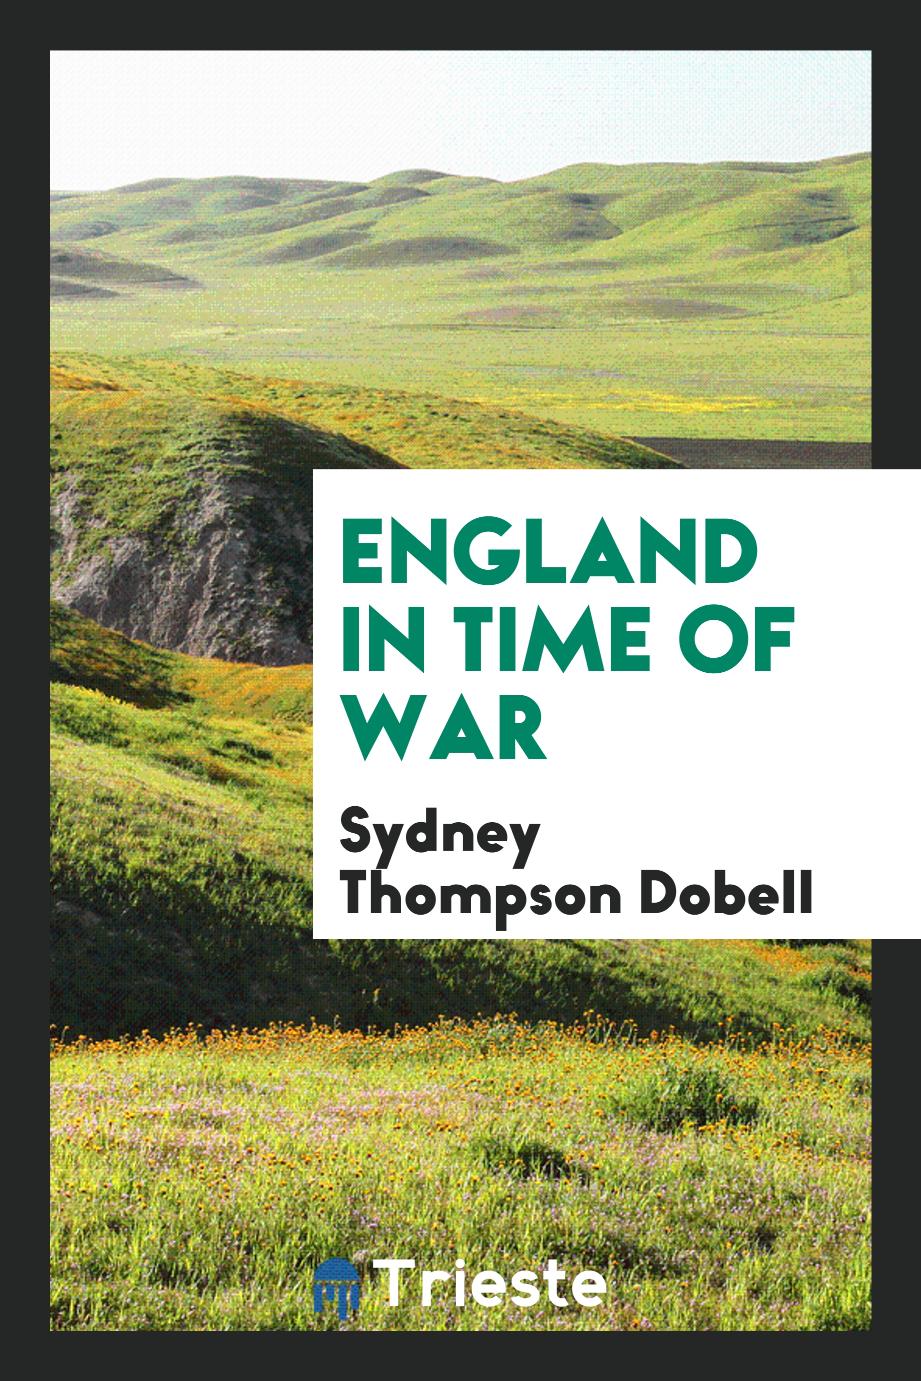 England in time of war